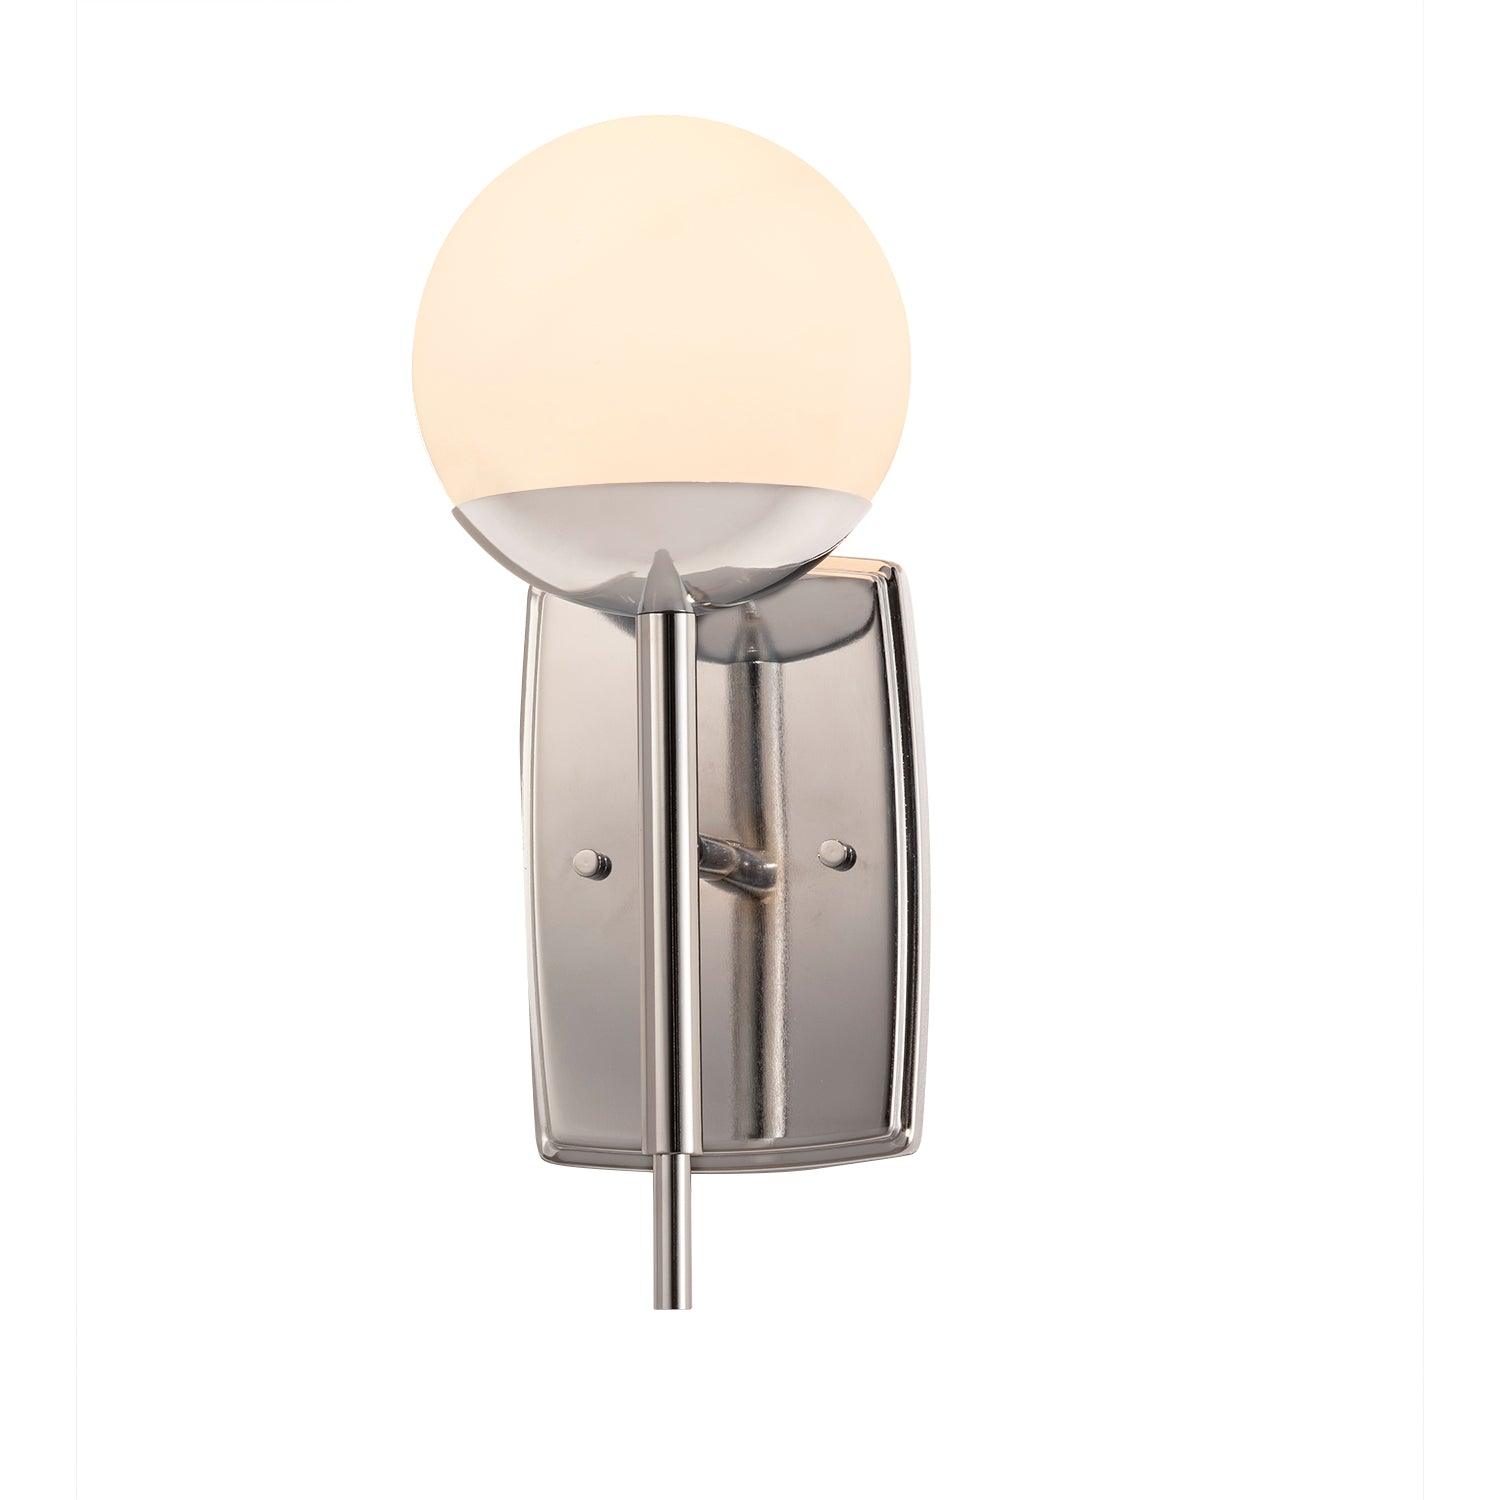 Justice Designs - Epoch Wall Sconce - FSN-8961-OPAL-CROM | Montreal Lighting & Hardware